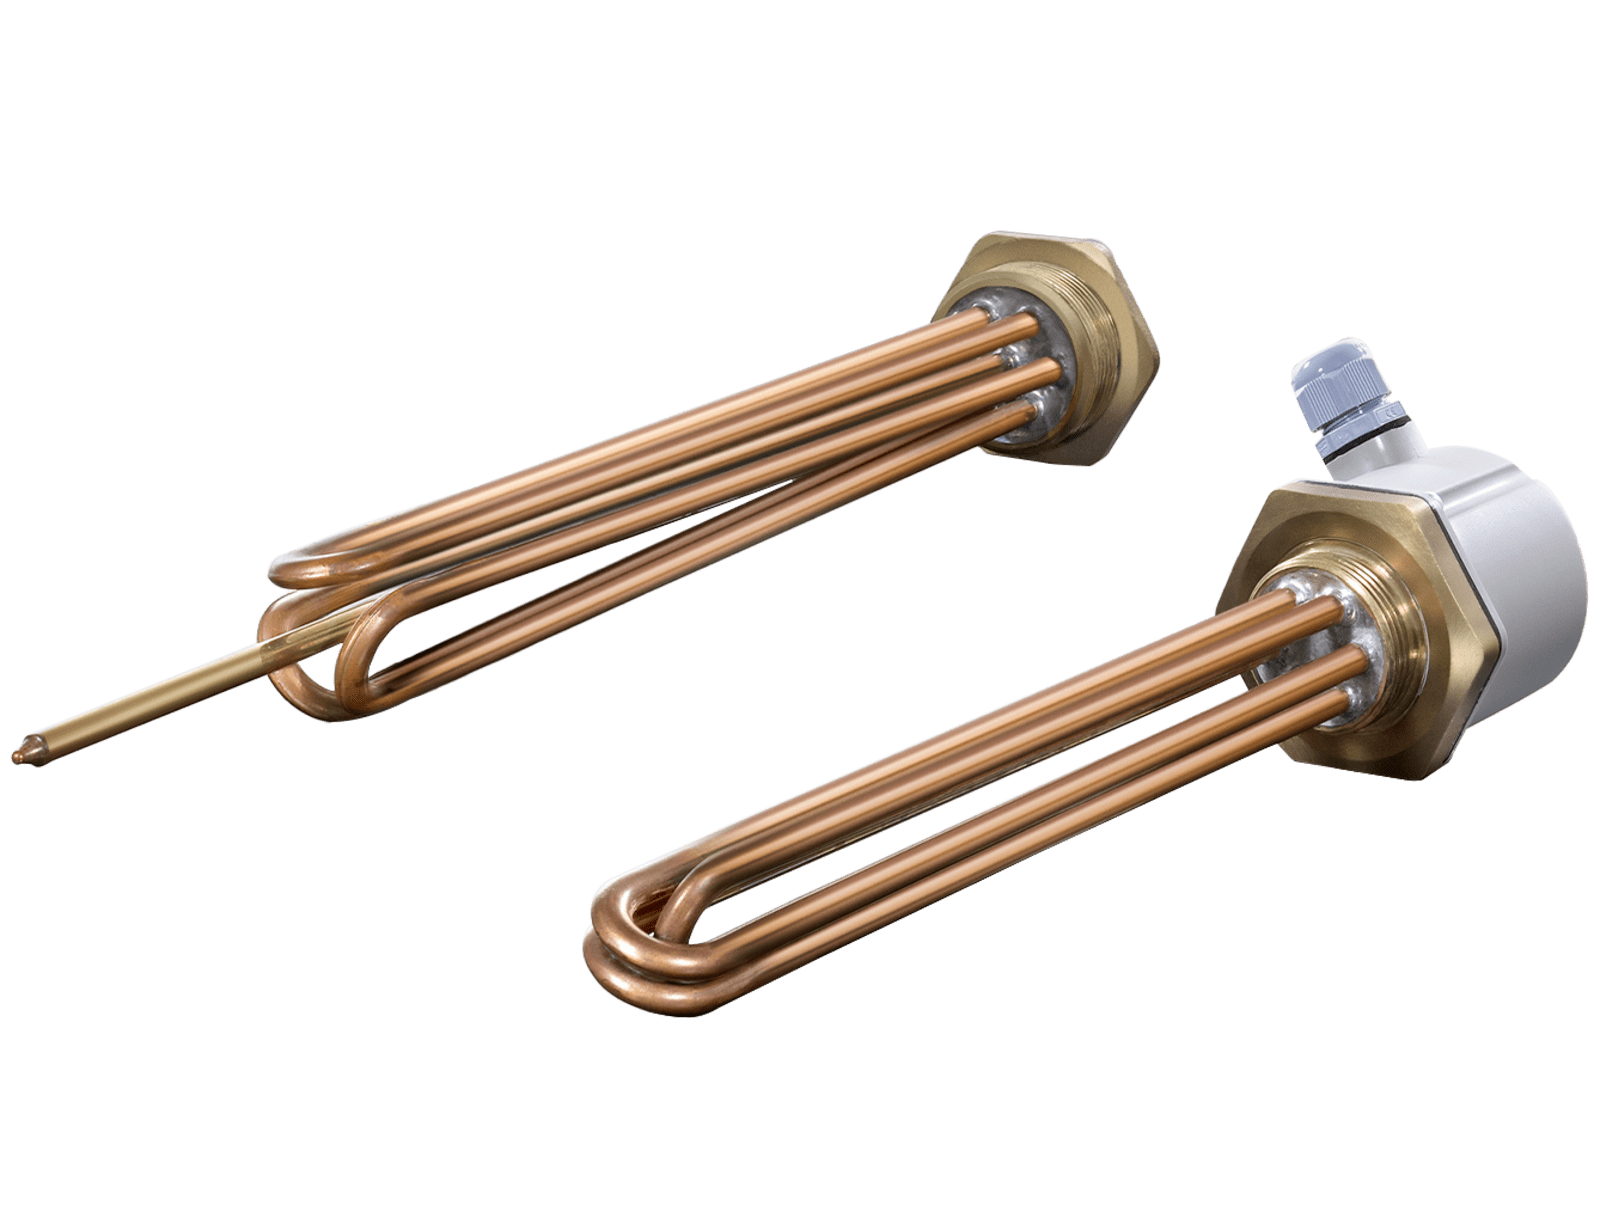 SPECIAL HEATING ELEMENT